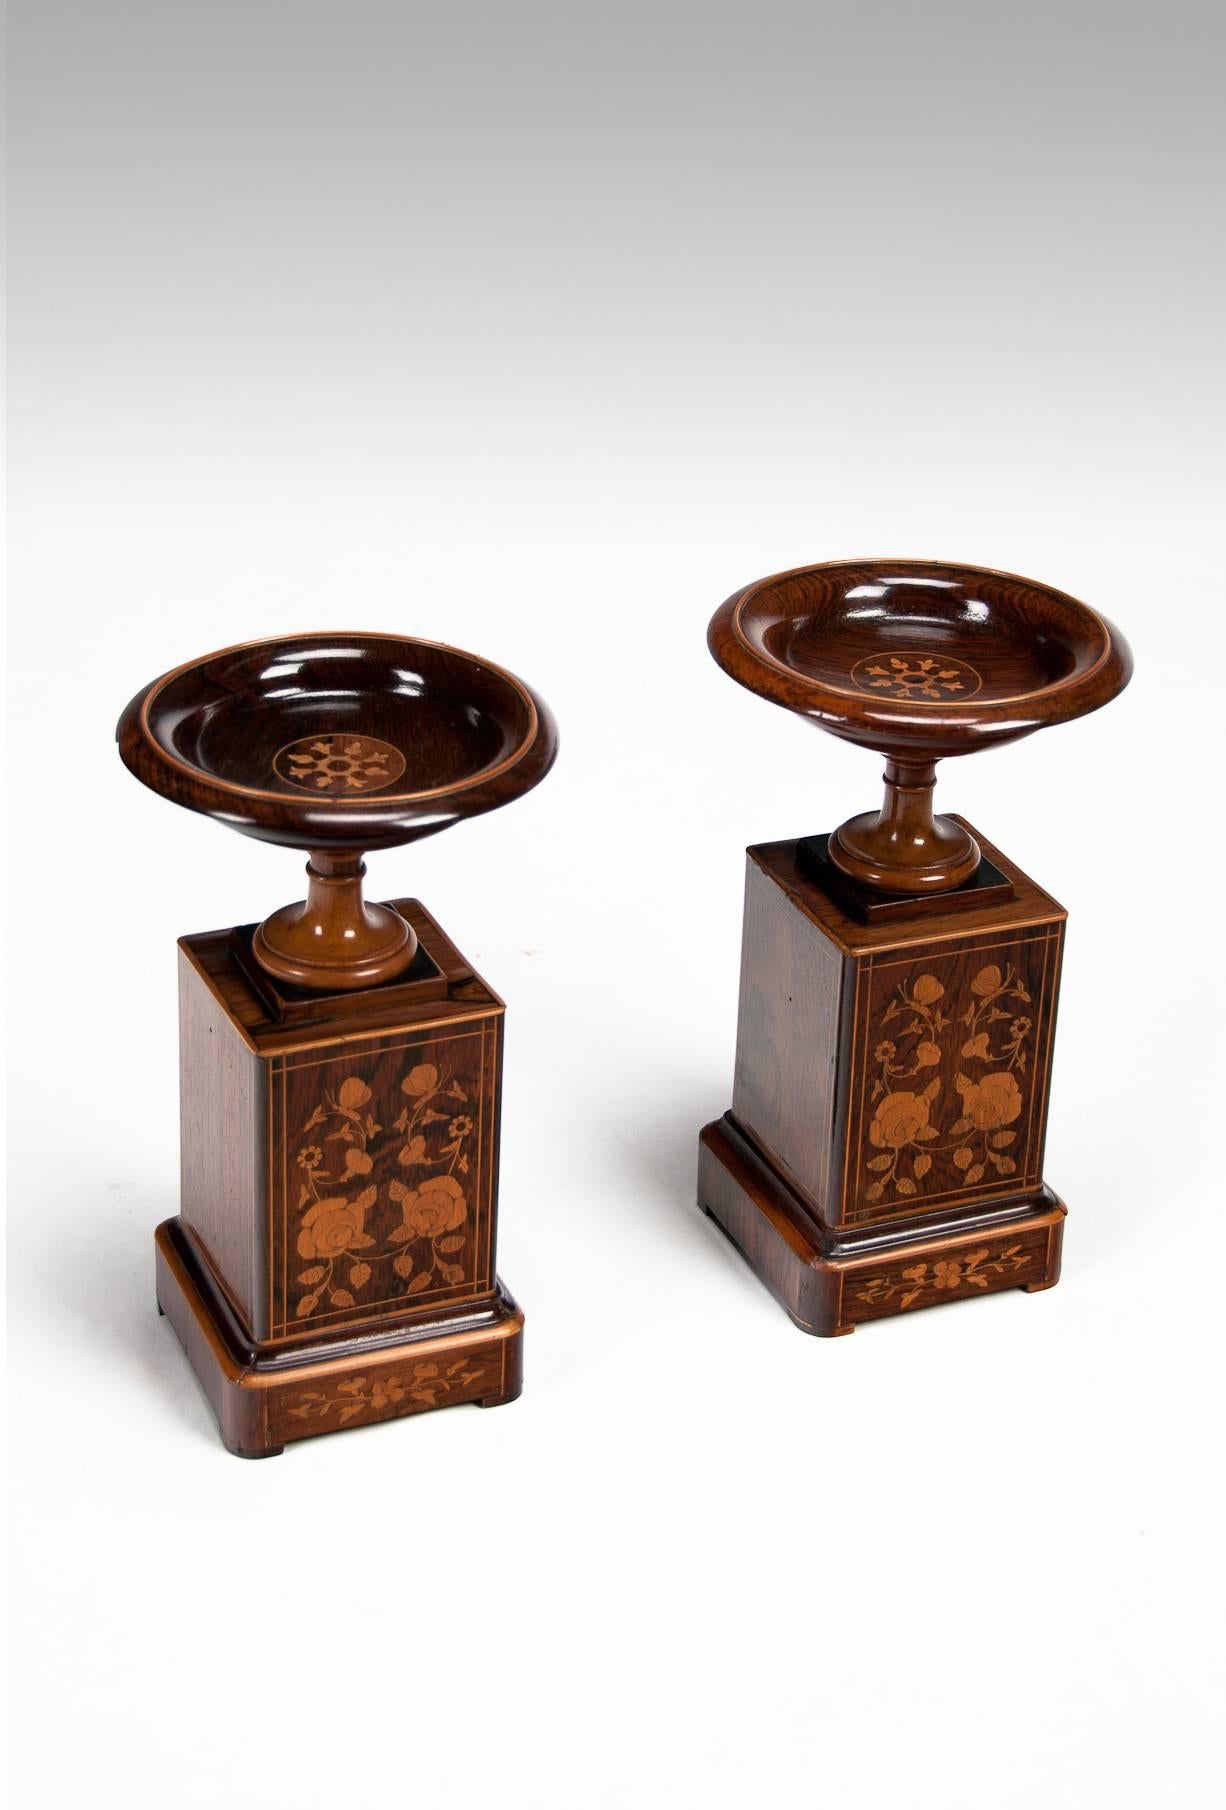 A fine quality pair of 19th Century Rosewood and boxwood Tazzas supported on marquetry inlaid pedestals circa 1860.
The finely dished tops having an inlaid rim with central circular floral pattern support by ring turned boxwood stems above a